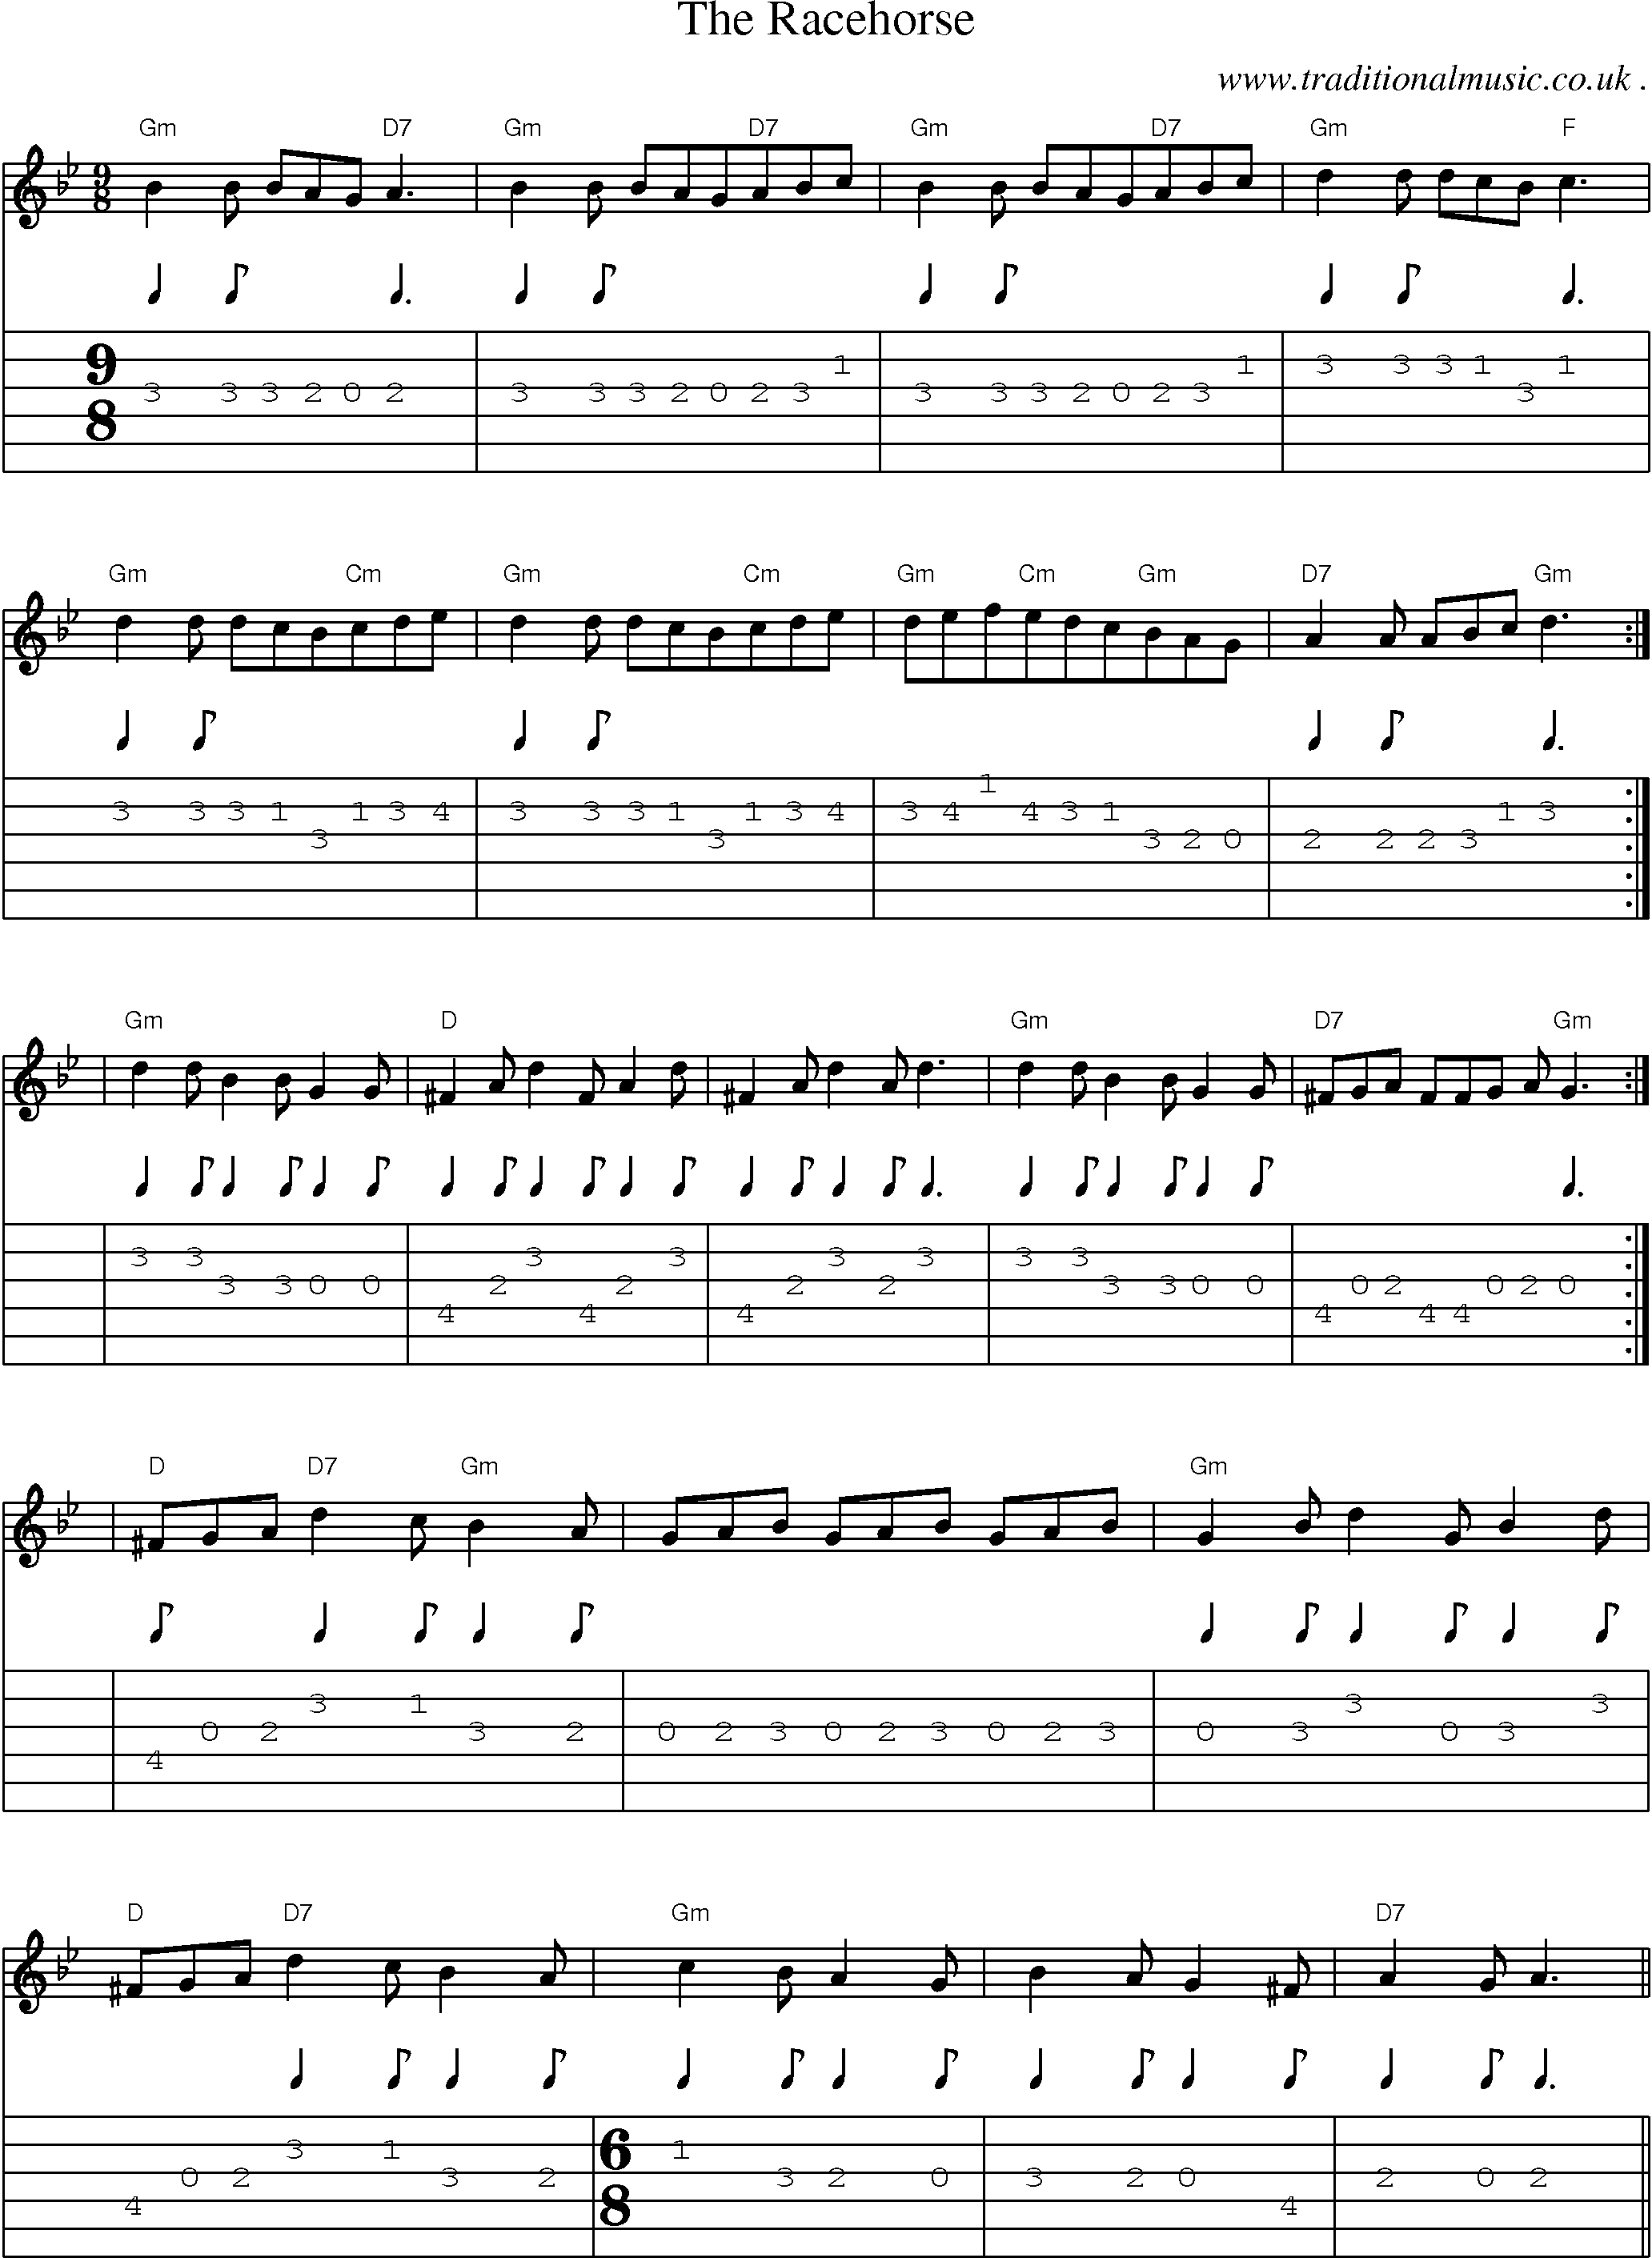 Sheet-Music and Guitar Tabs for The Racehorse